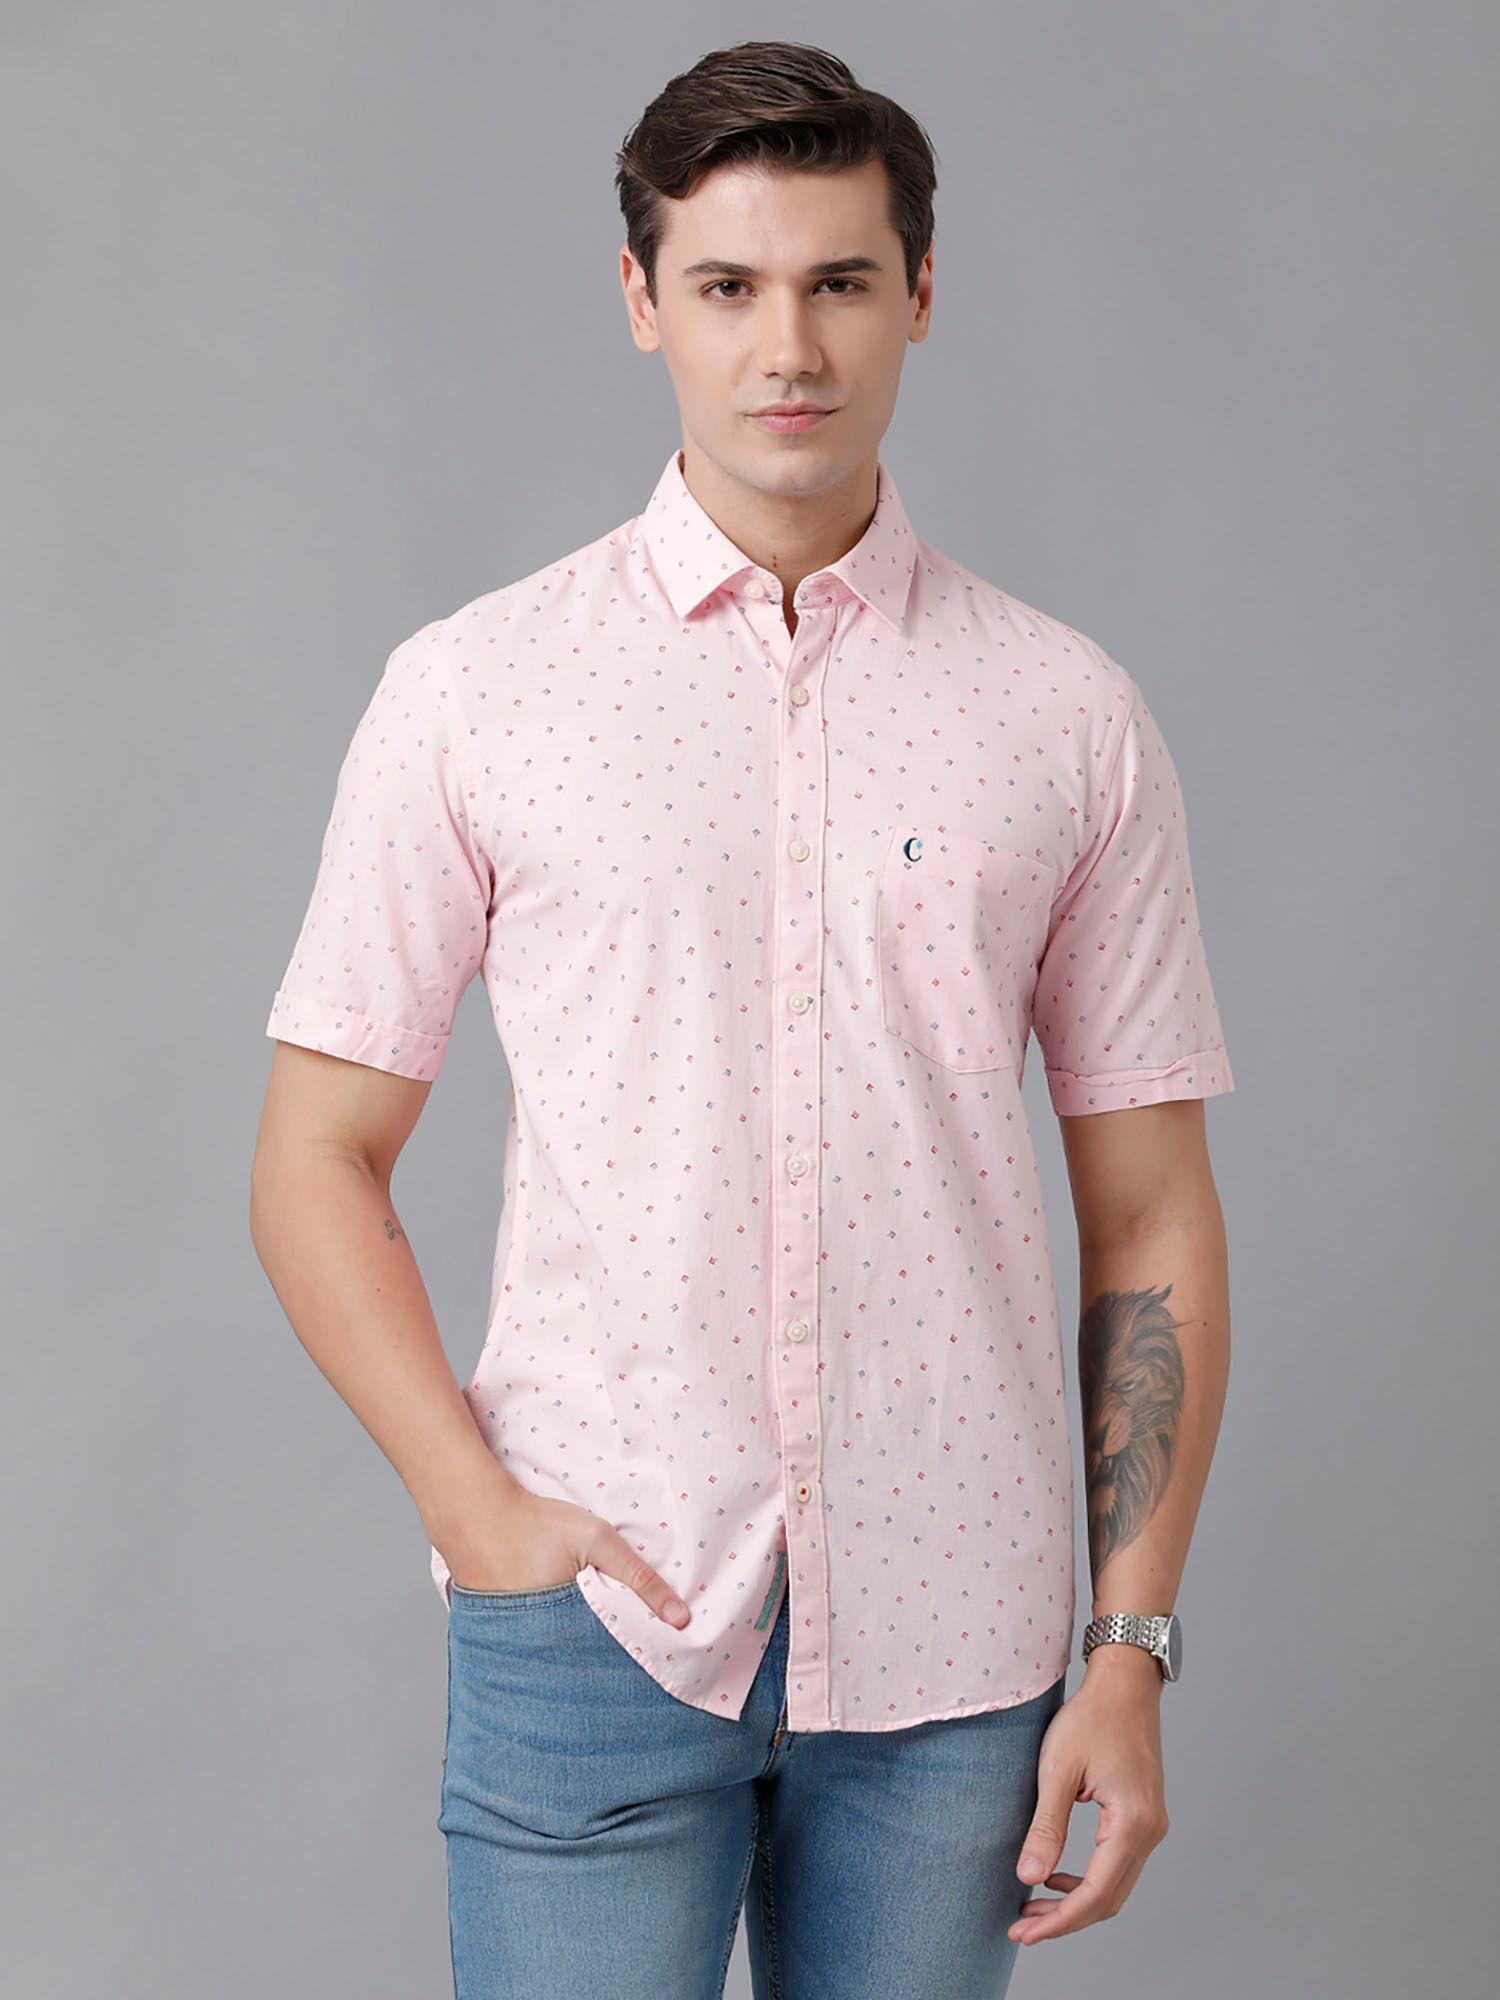 men's-cotton-linen-red-printed-slim-fit-half-sleeve-casual-shirt